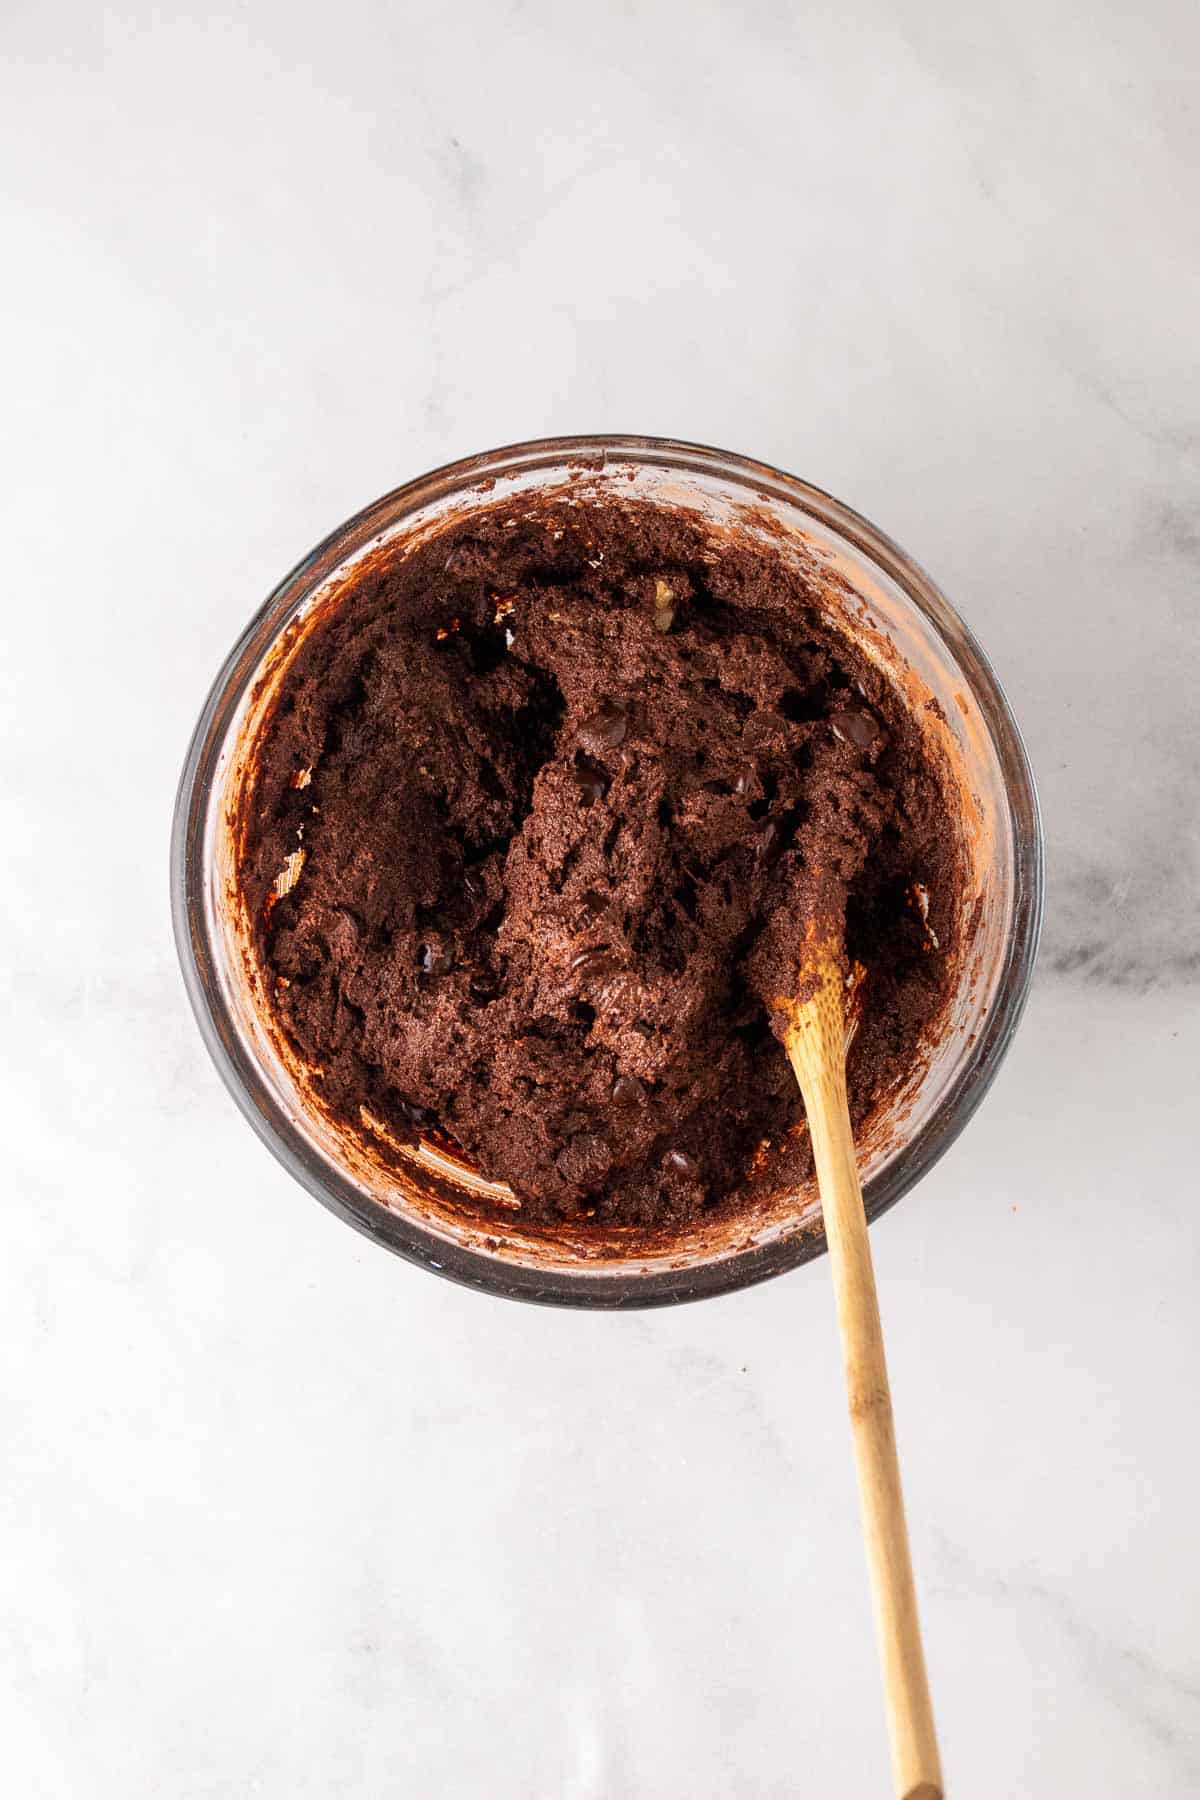 Brownie batter mixed together with a wooden spoon in a large glass bowl